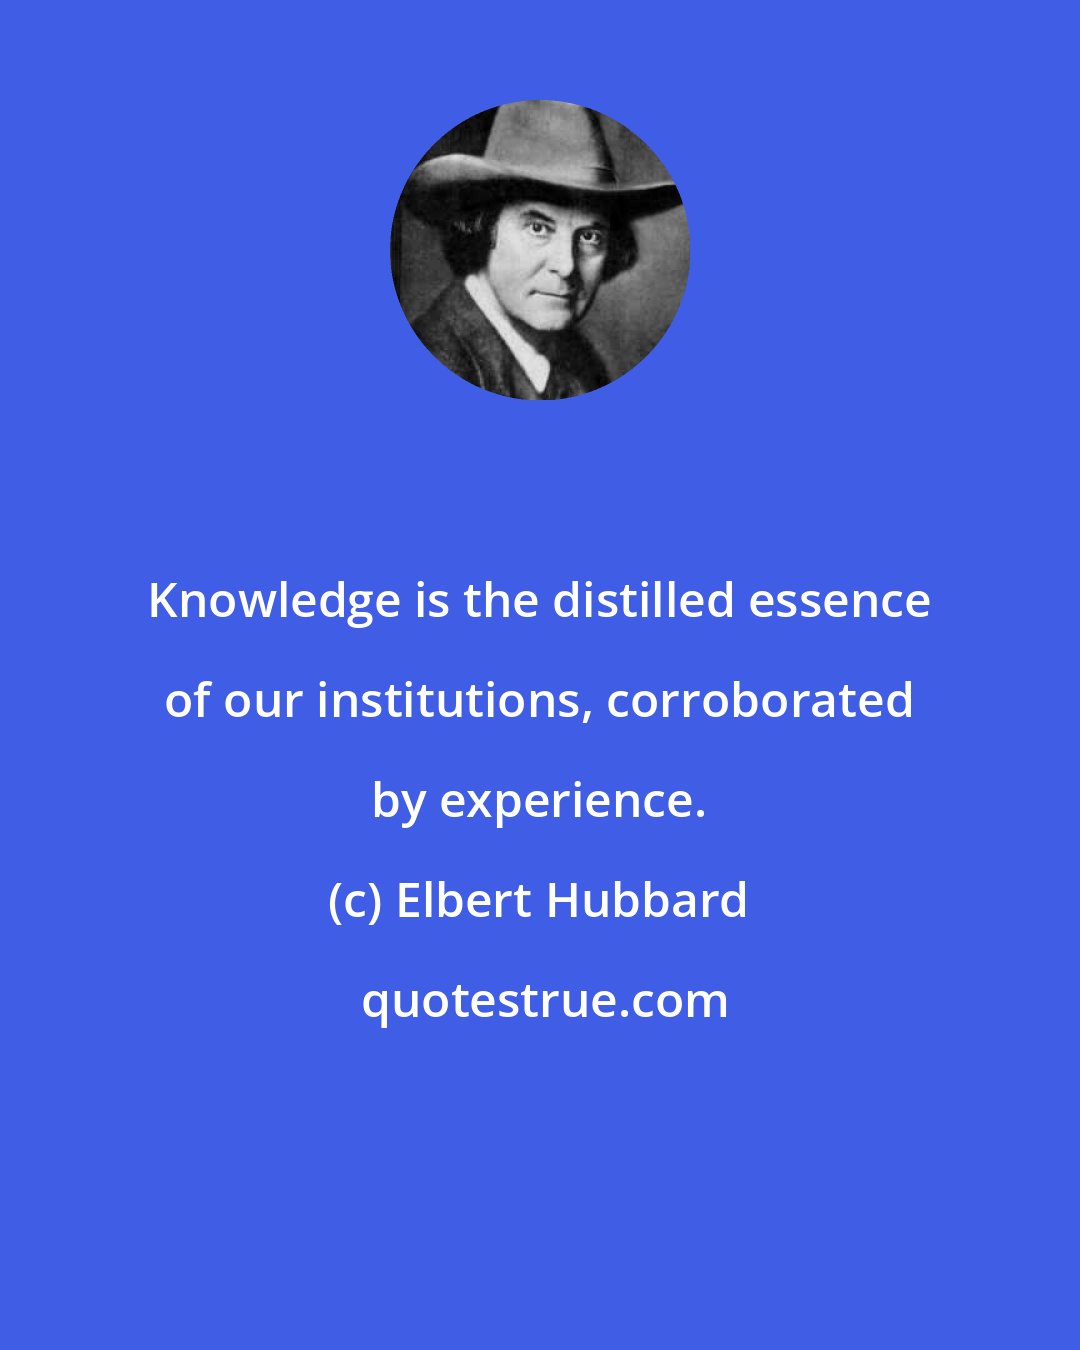 Elbert Hubbard: Knowledge is the distilled essence of our institutions, corroborated by experience.